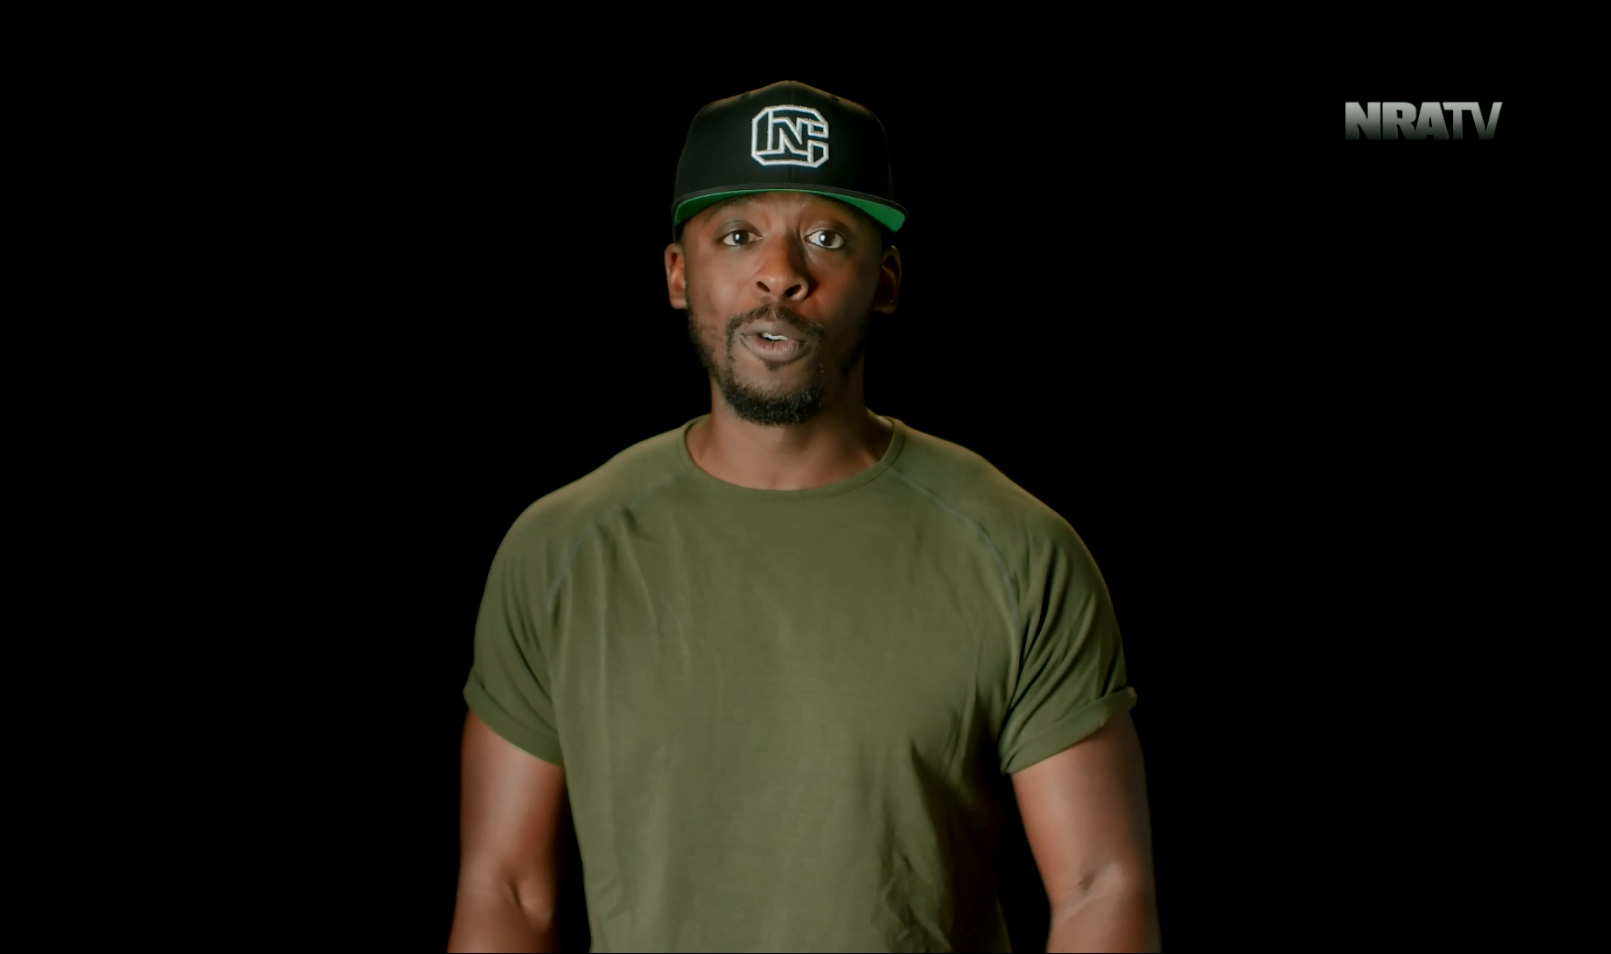 Colion Noir said that the media's 'glorification of carnage' was killing American children